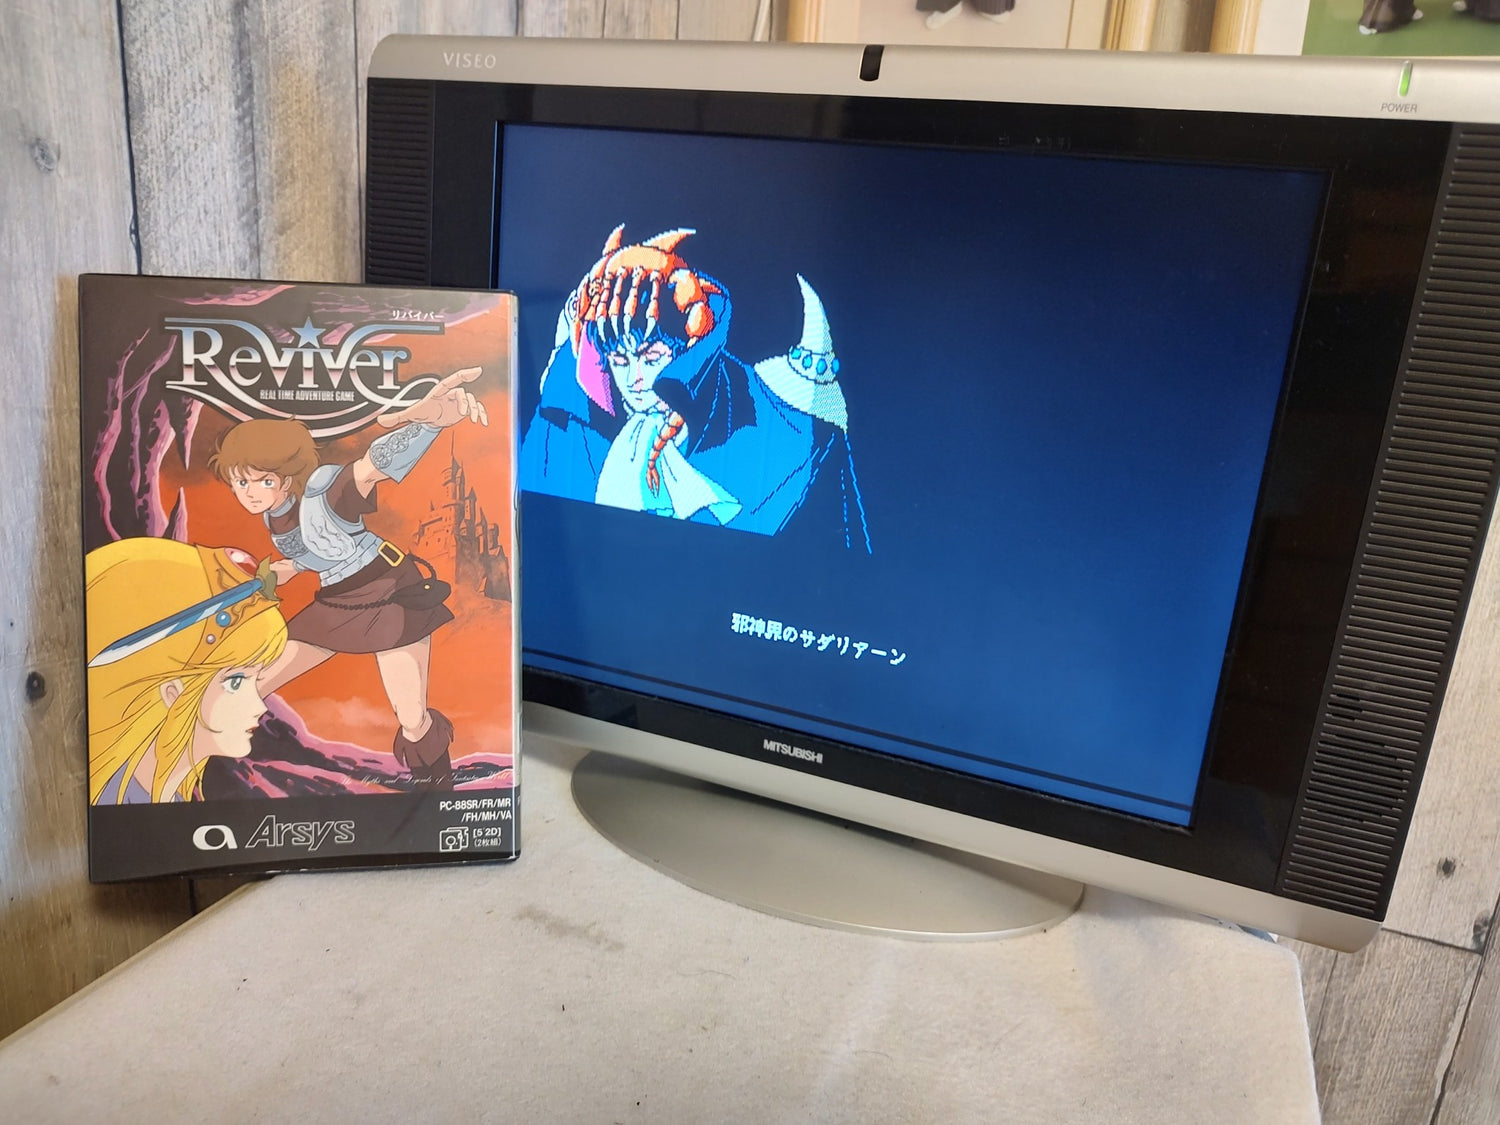 PC-8801 PC88 Reviver Game Disks, Manual, Box set, Working-f0107 